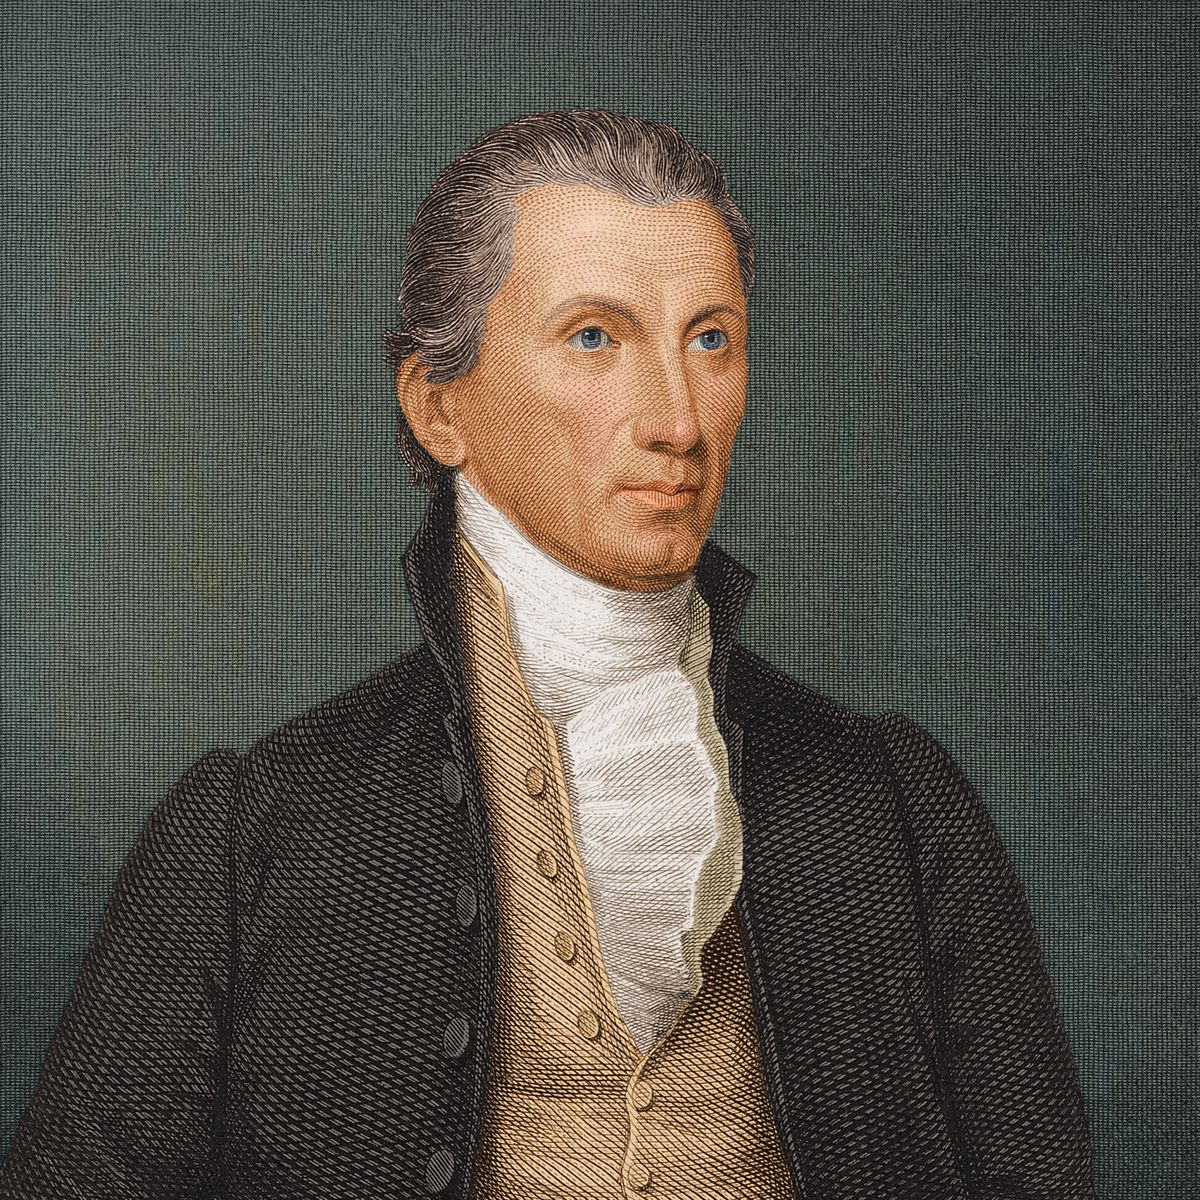 Interesting Bio Facts about James Monroe, 5th US President